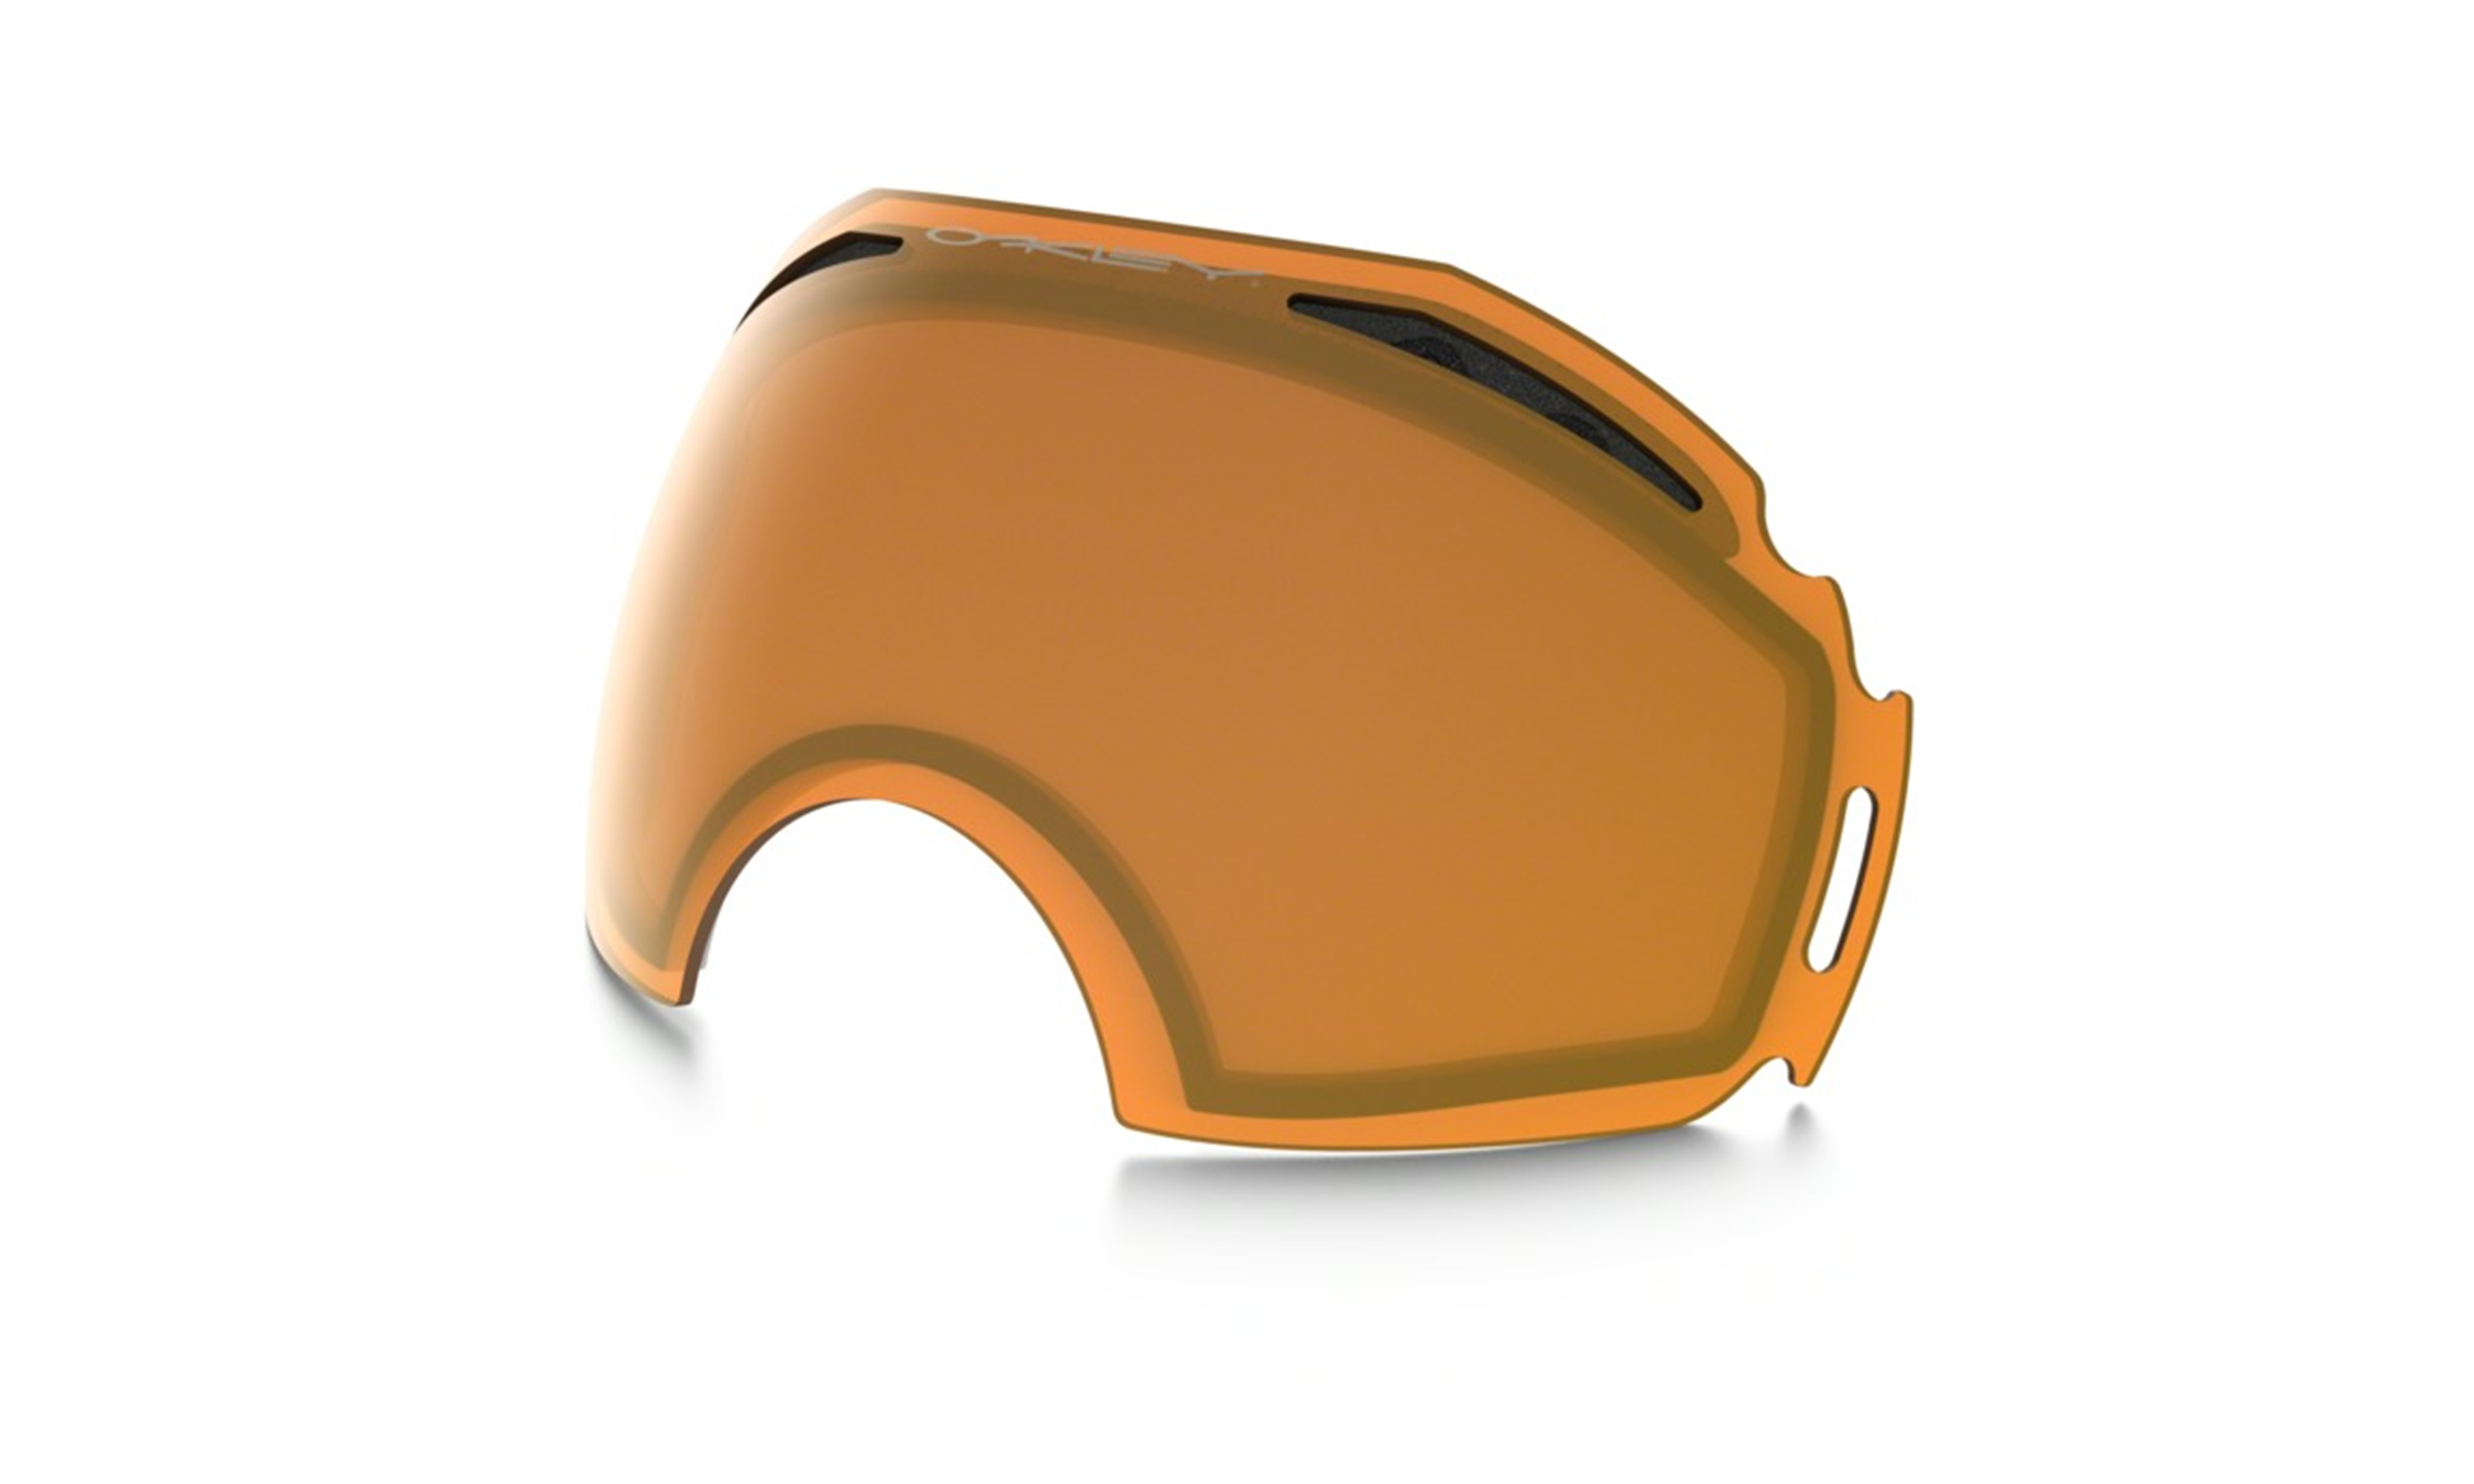 oakley goggle lens replacement